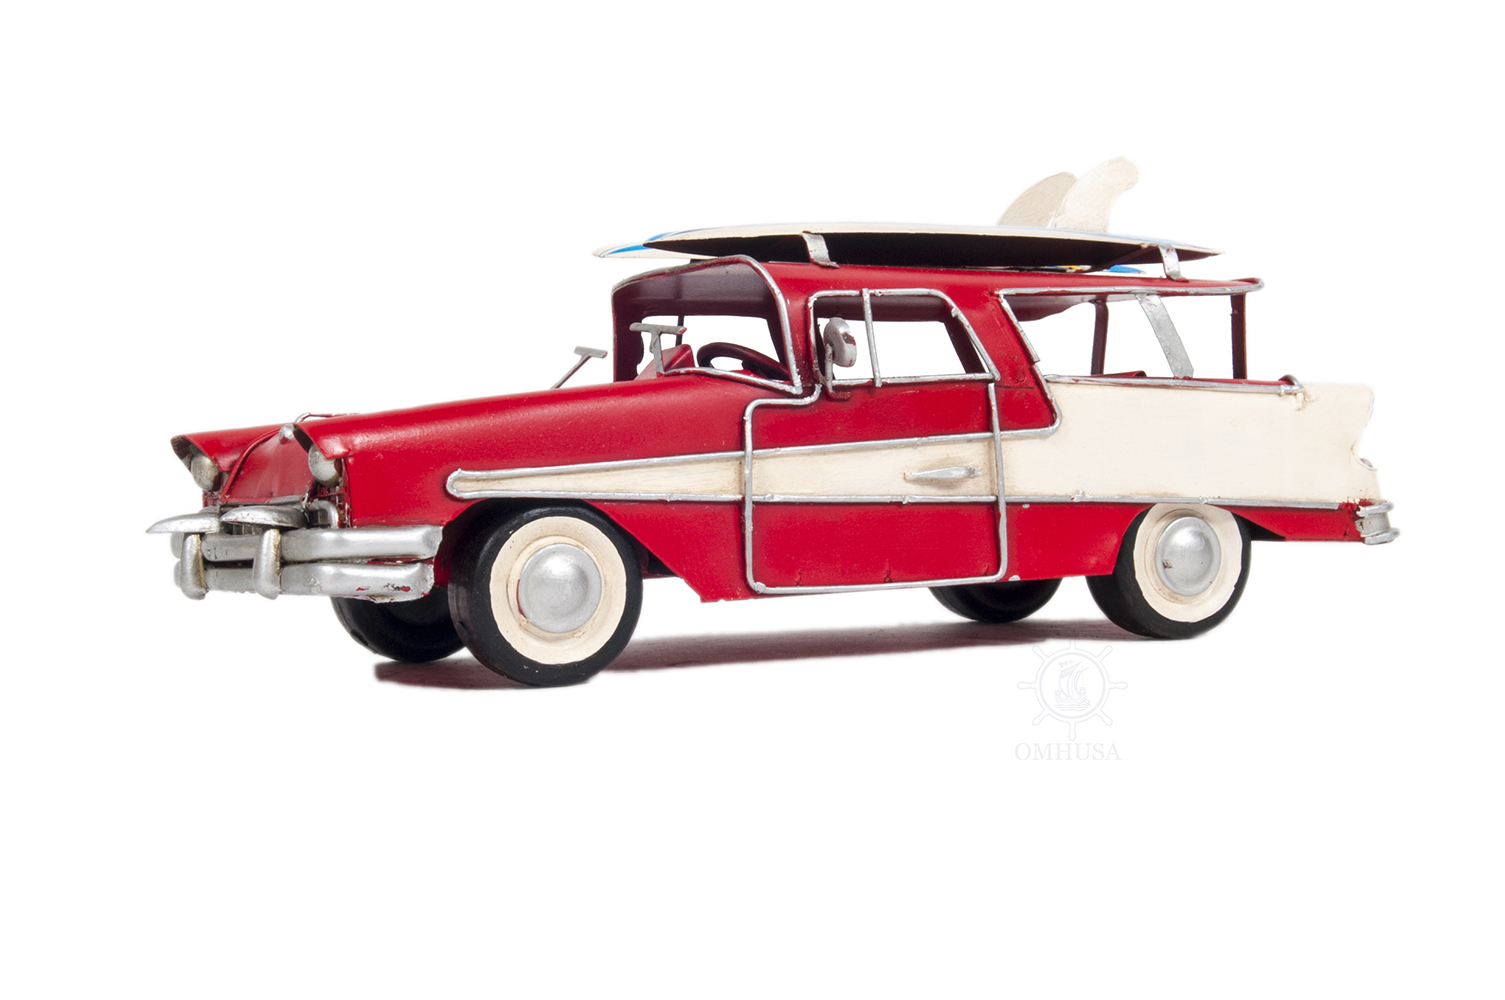 AJ096 1957 Ford Country Squire Station Wagon Red aj096-1957-ford-country-squire-station-wagon-red-l01.jpg